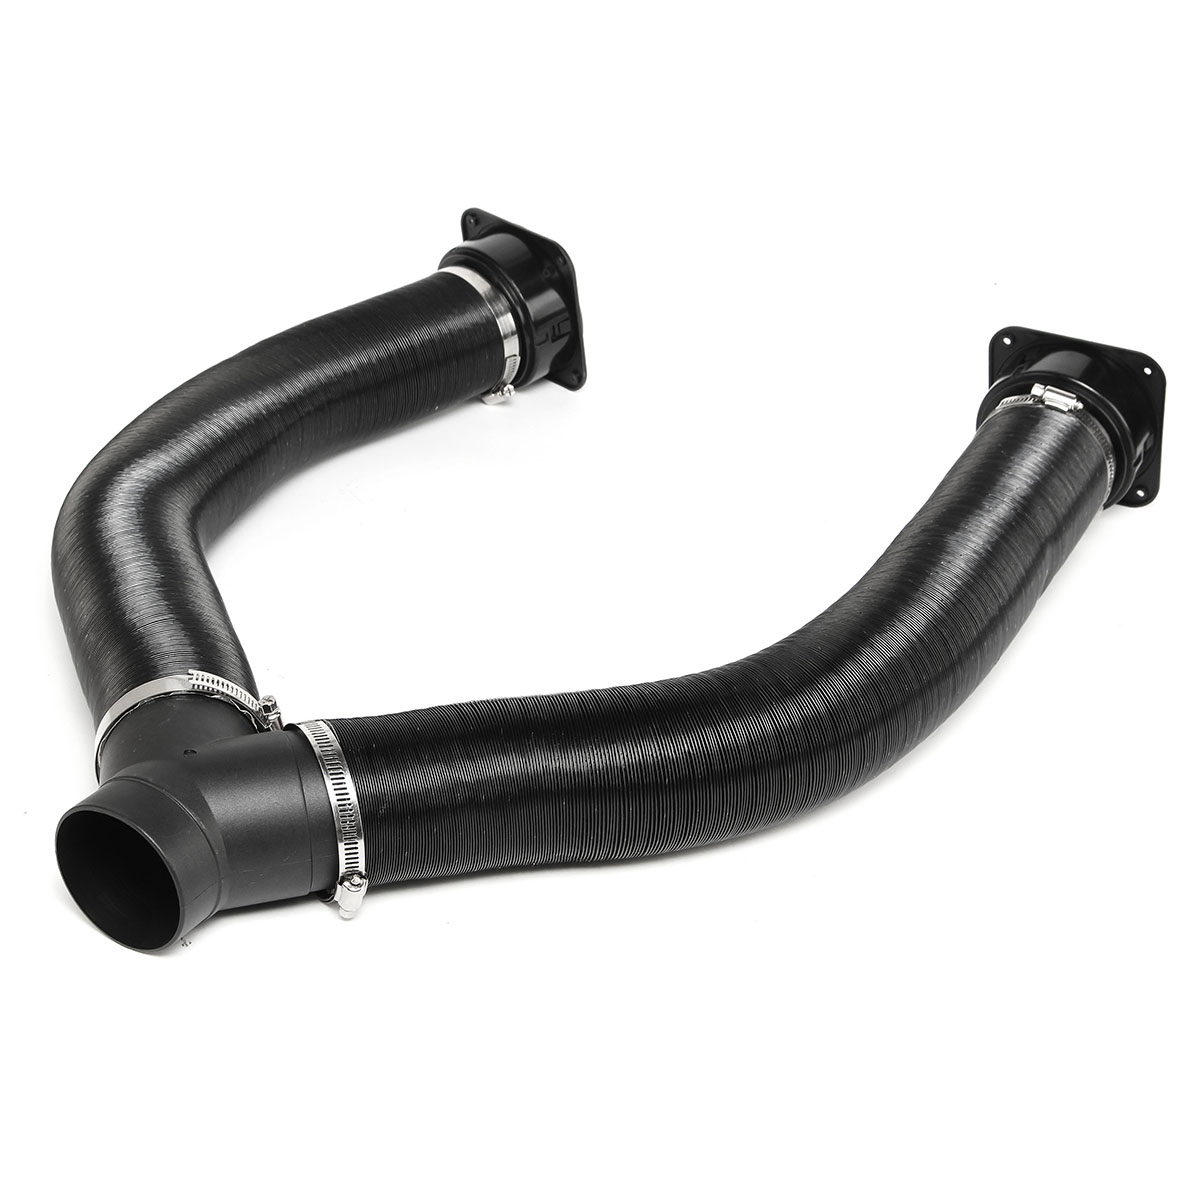 75mm-Heater-Pipe-Duct--Warm-Air-Outlet-For-Diesel-Heater-Webasto-Eberspacher-1396630-8